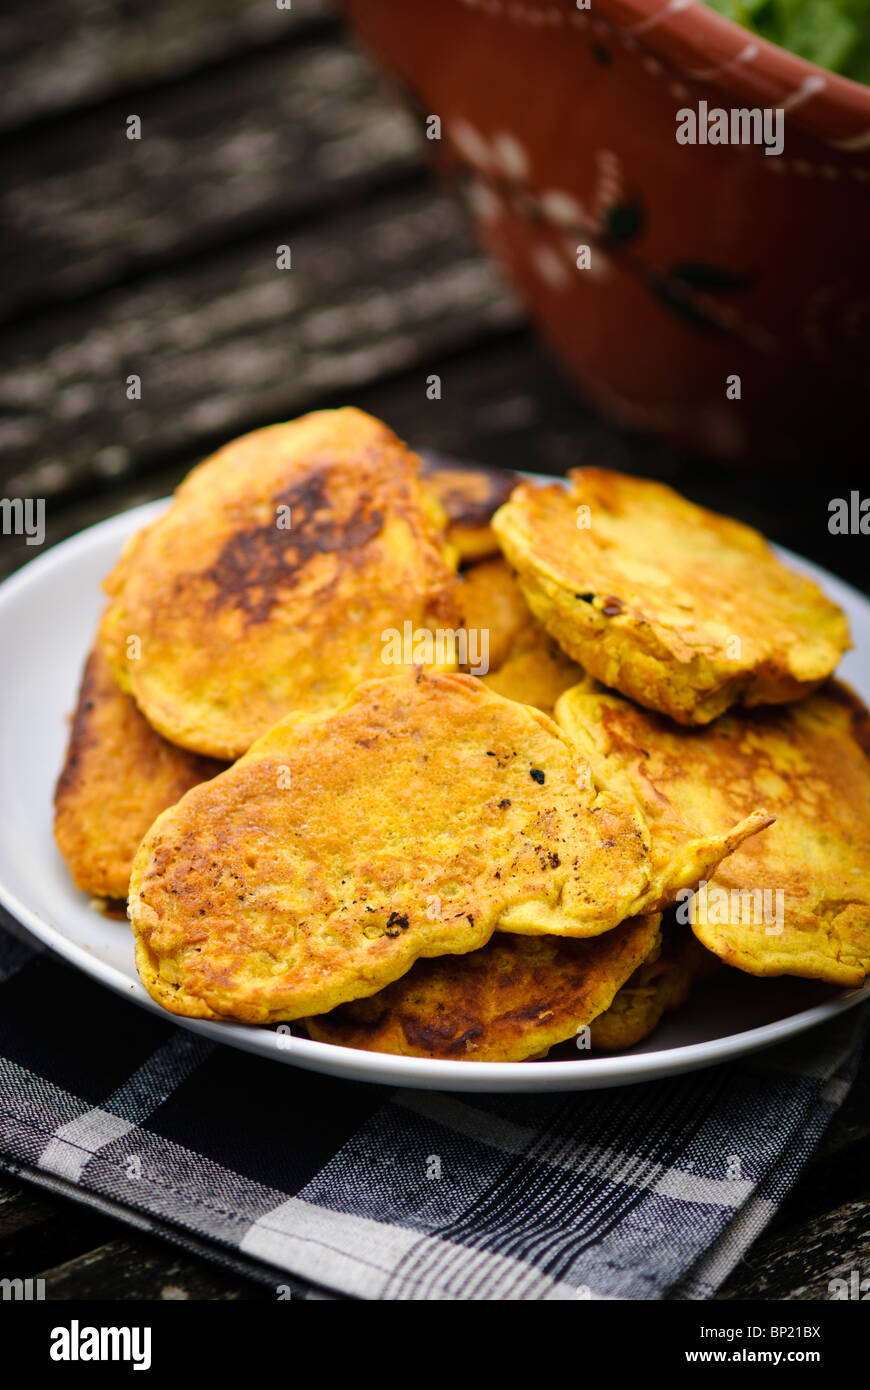 Gluten free fritters made with gram flour batter and prawns Stock Photo